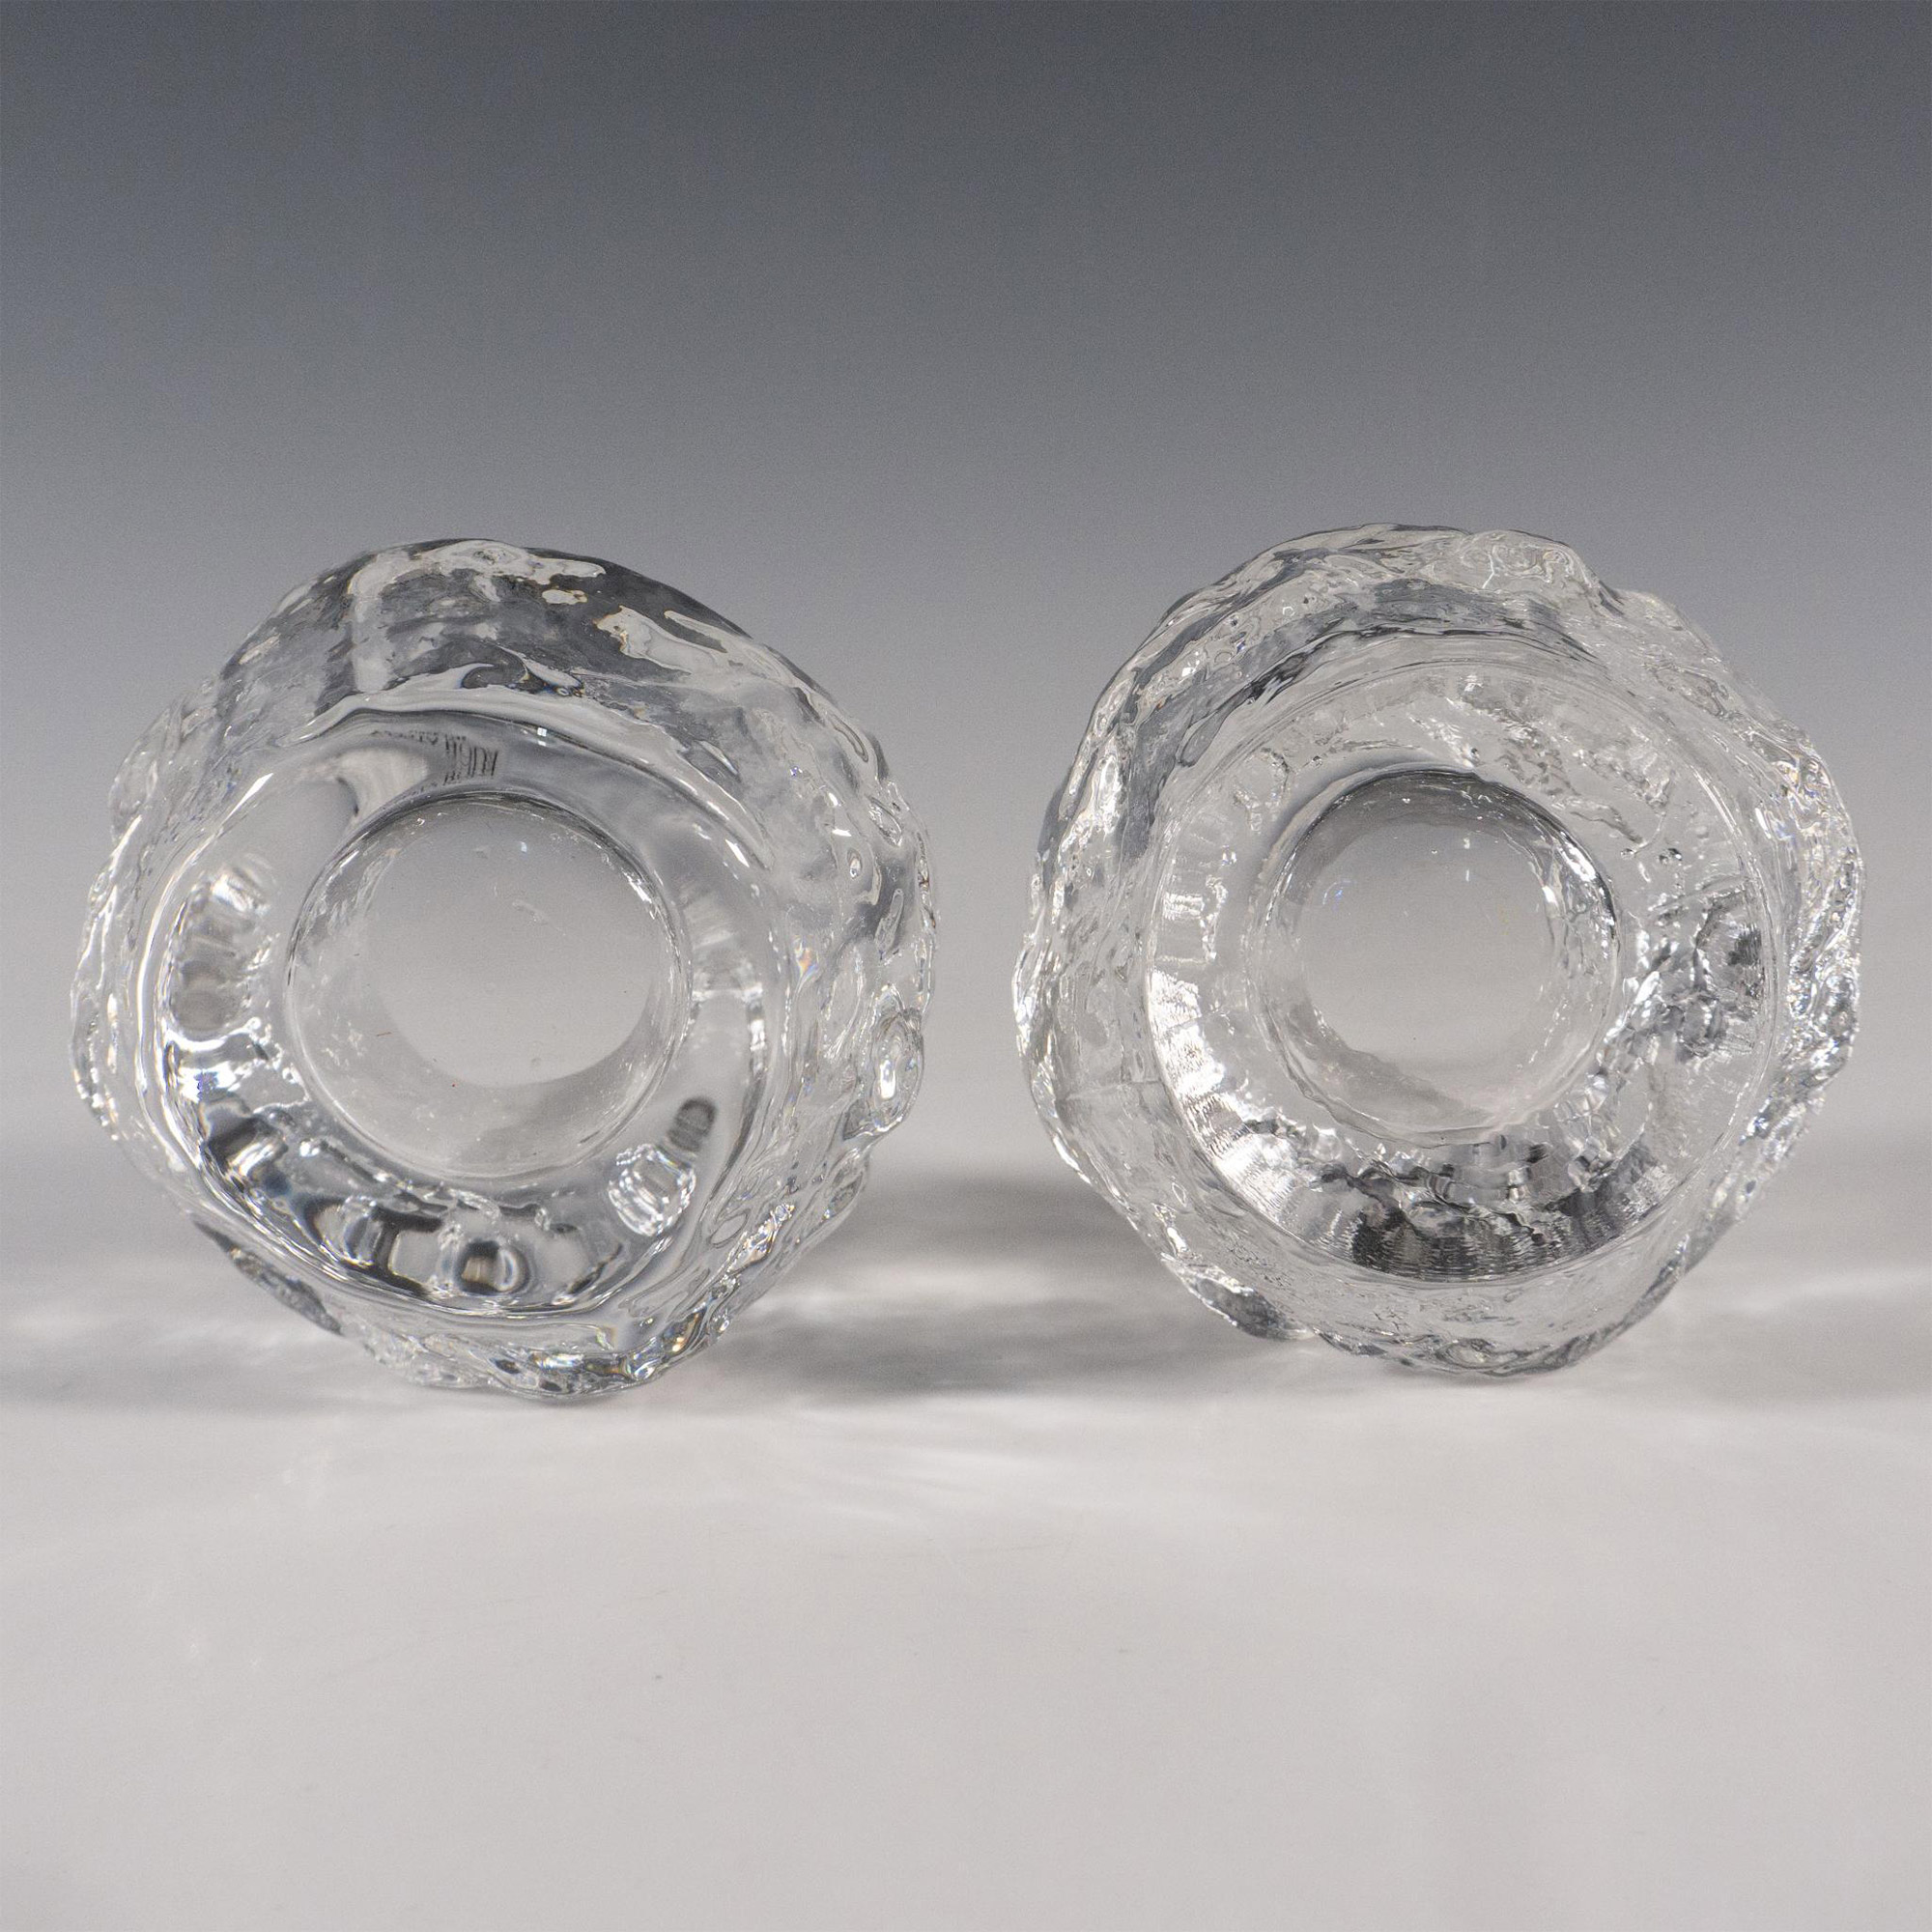 Pair of Kosta Boda by Ann Warff Candle Holders, Snowball - Image 2 of 3